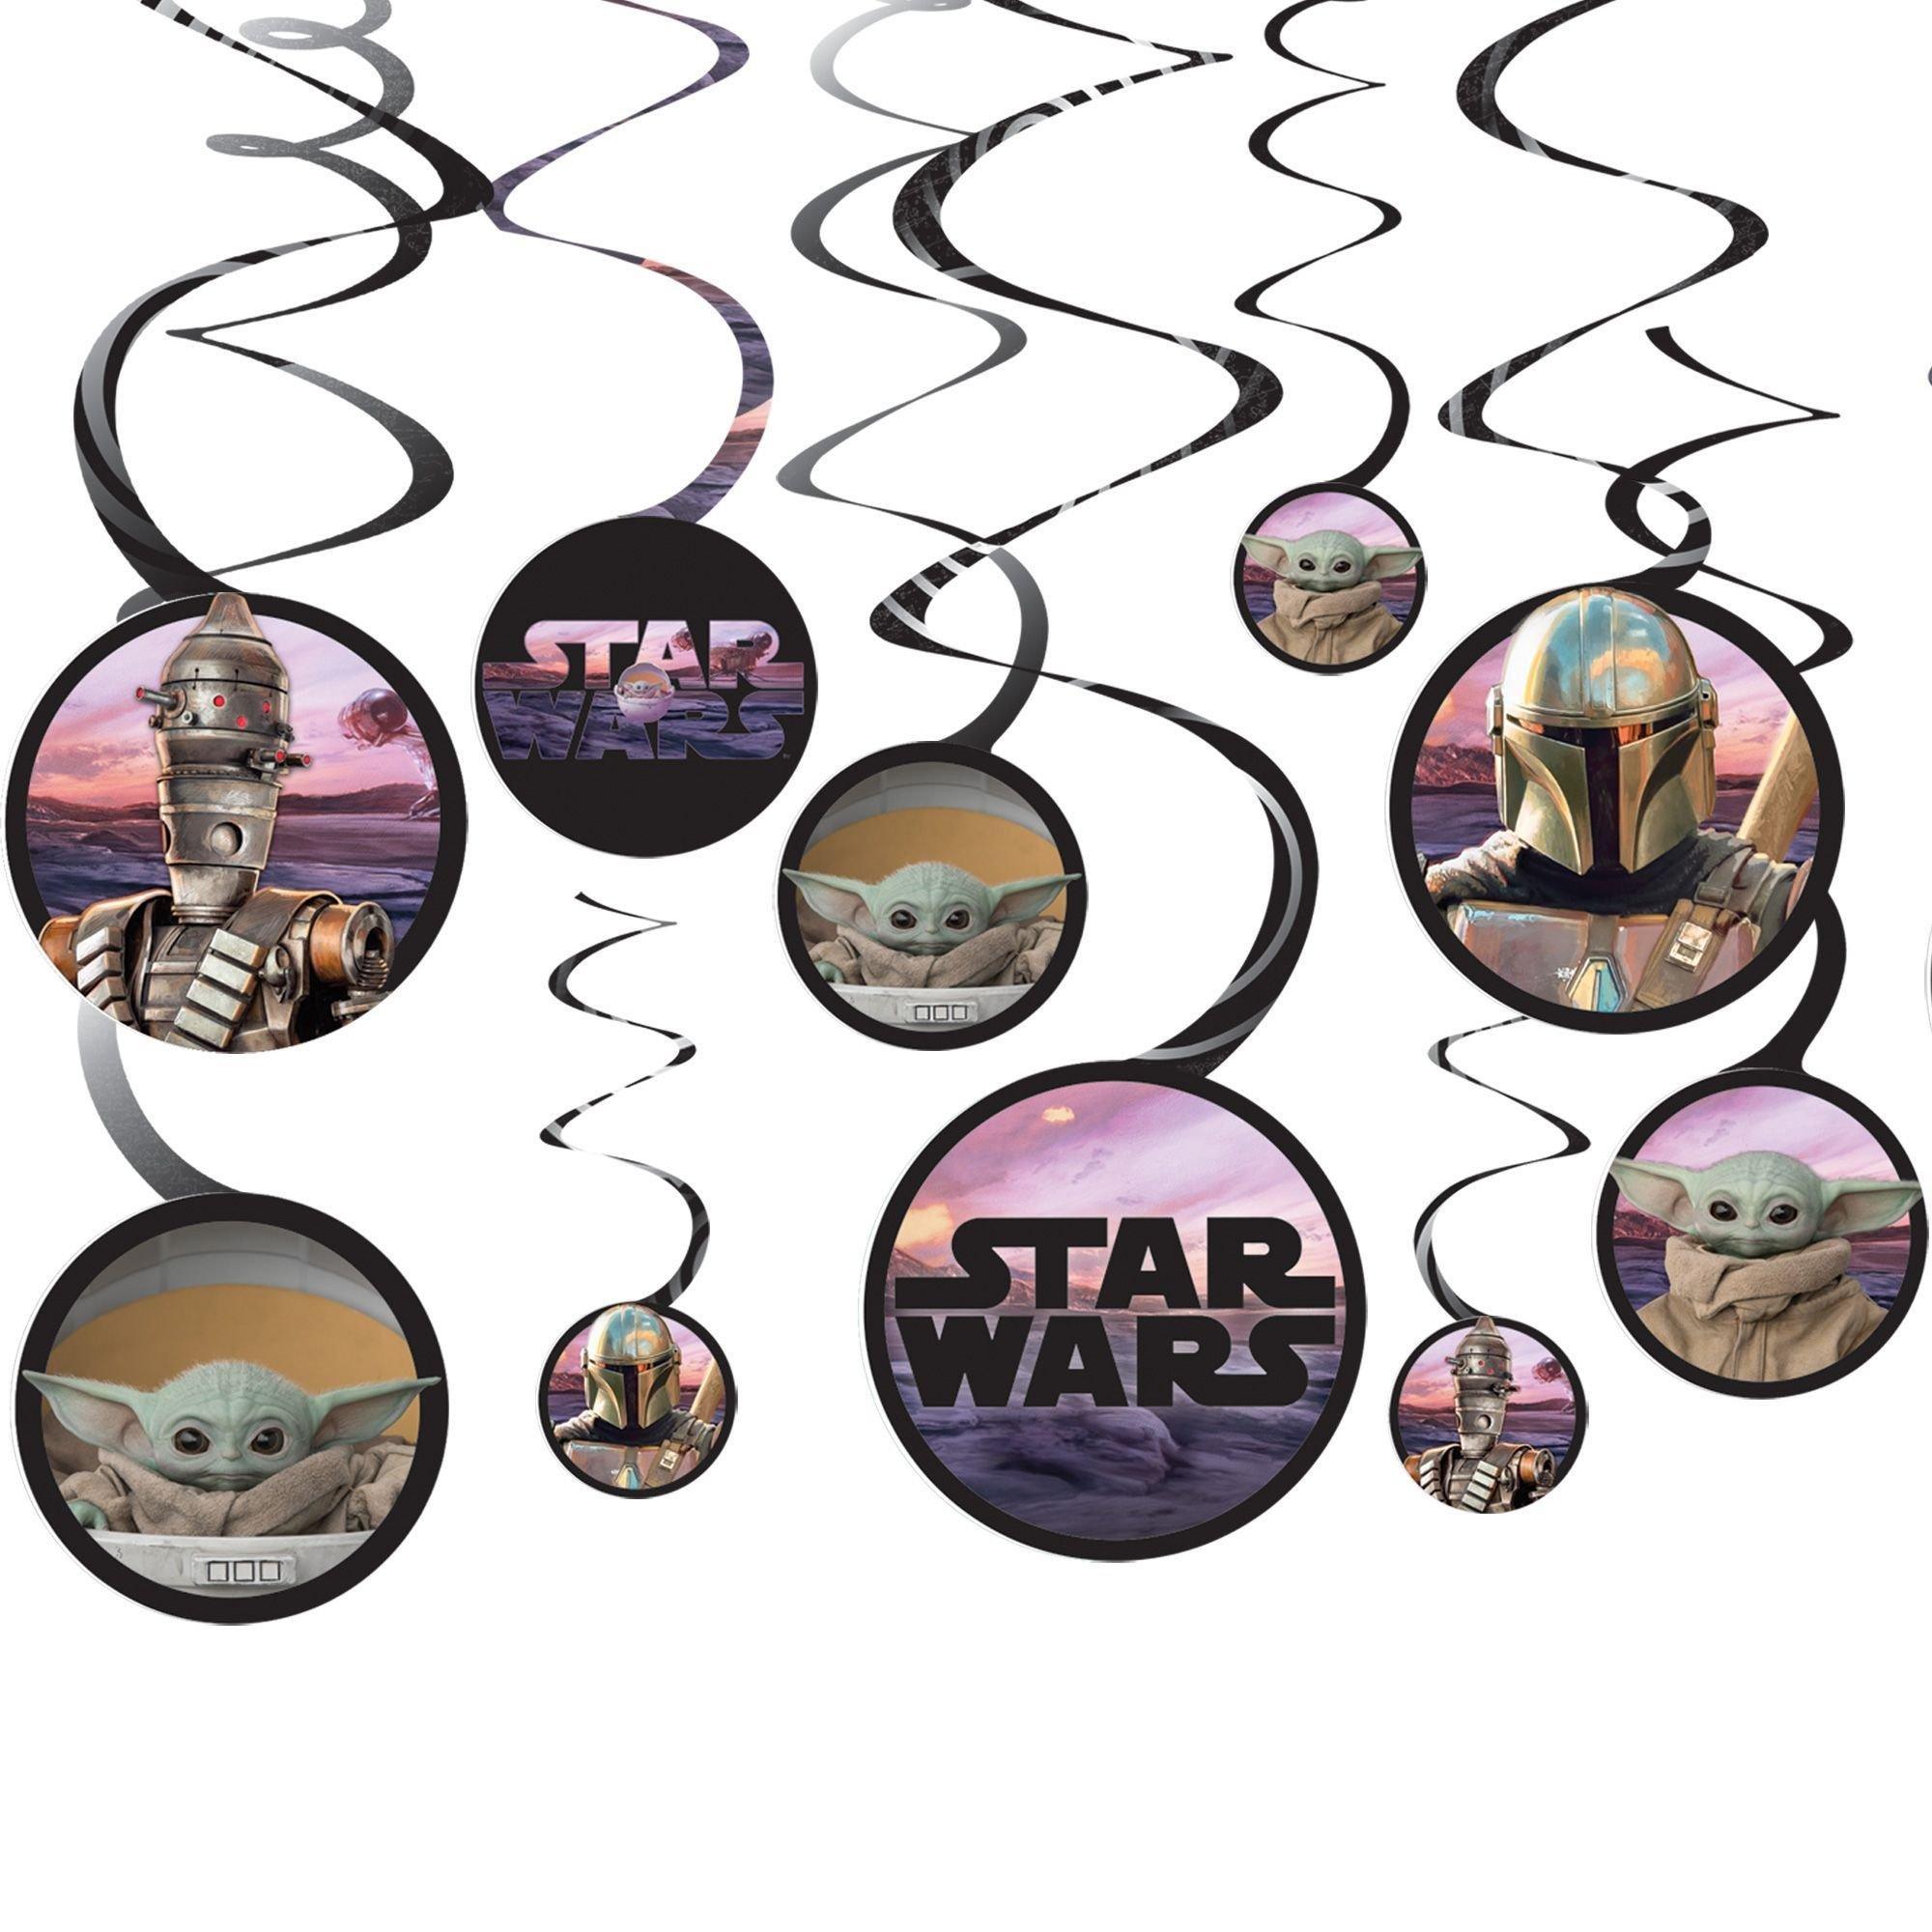 The Mandalorian Birthday Party Supplies Pack for 8 Guests - Kit Includes Plates, Napkins, Cups, Table Cover & Swirl Decorations